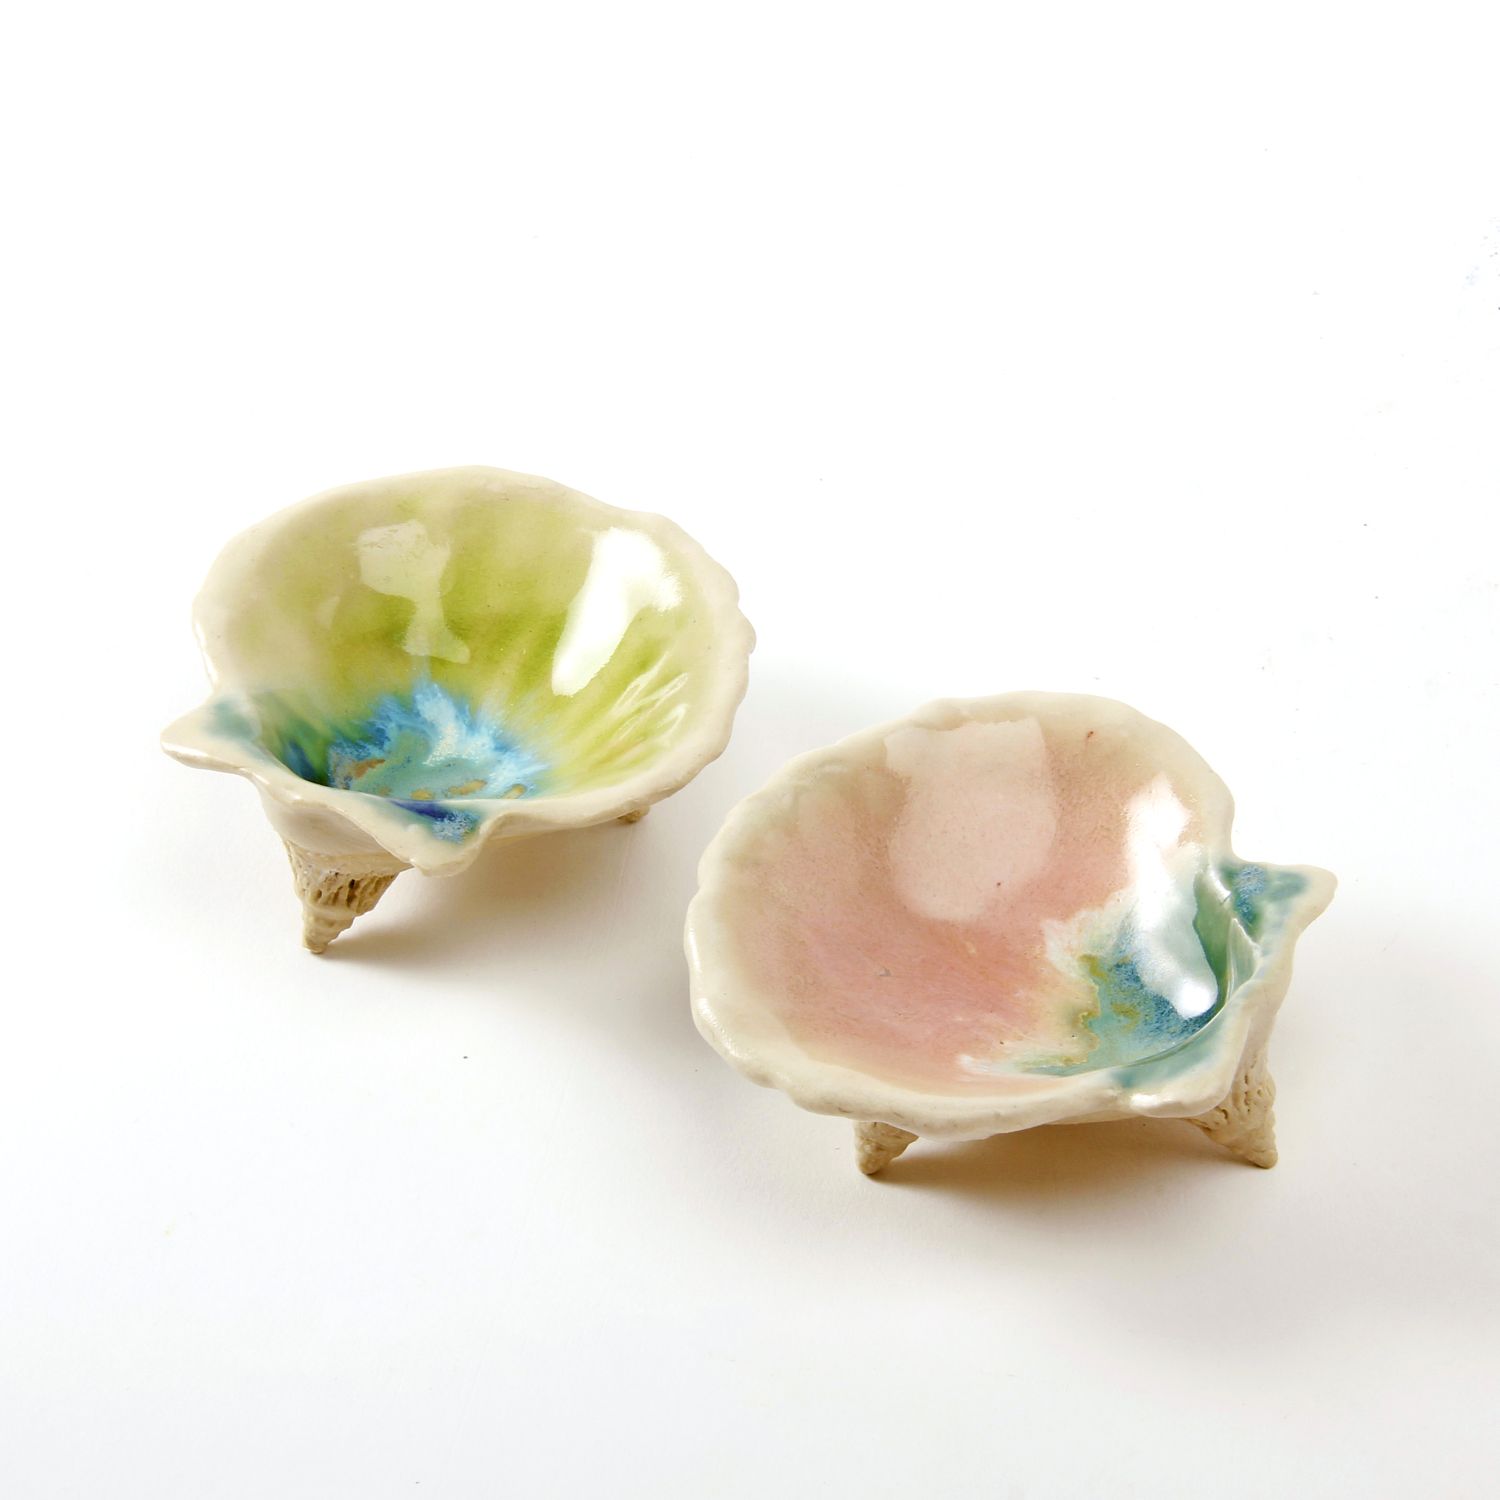 Brenda Nieves: Small Clam Plate Product Image 1 of 4